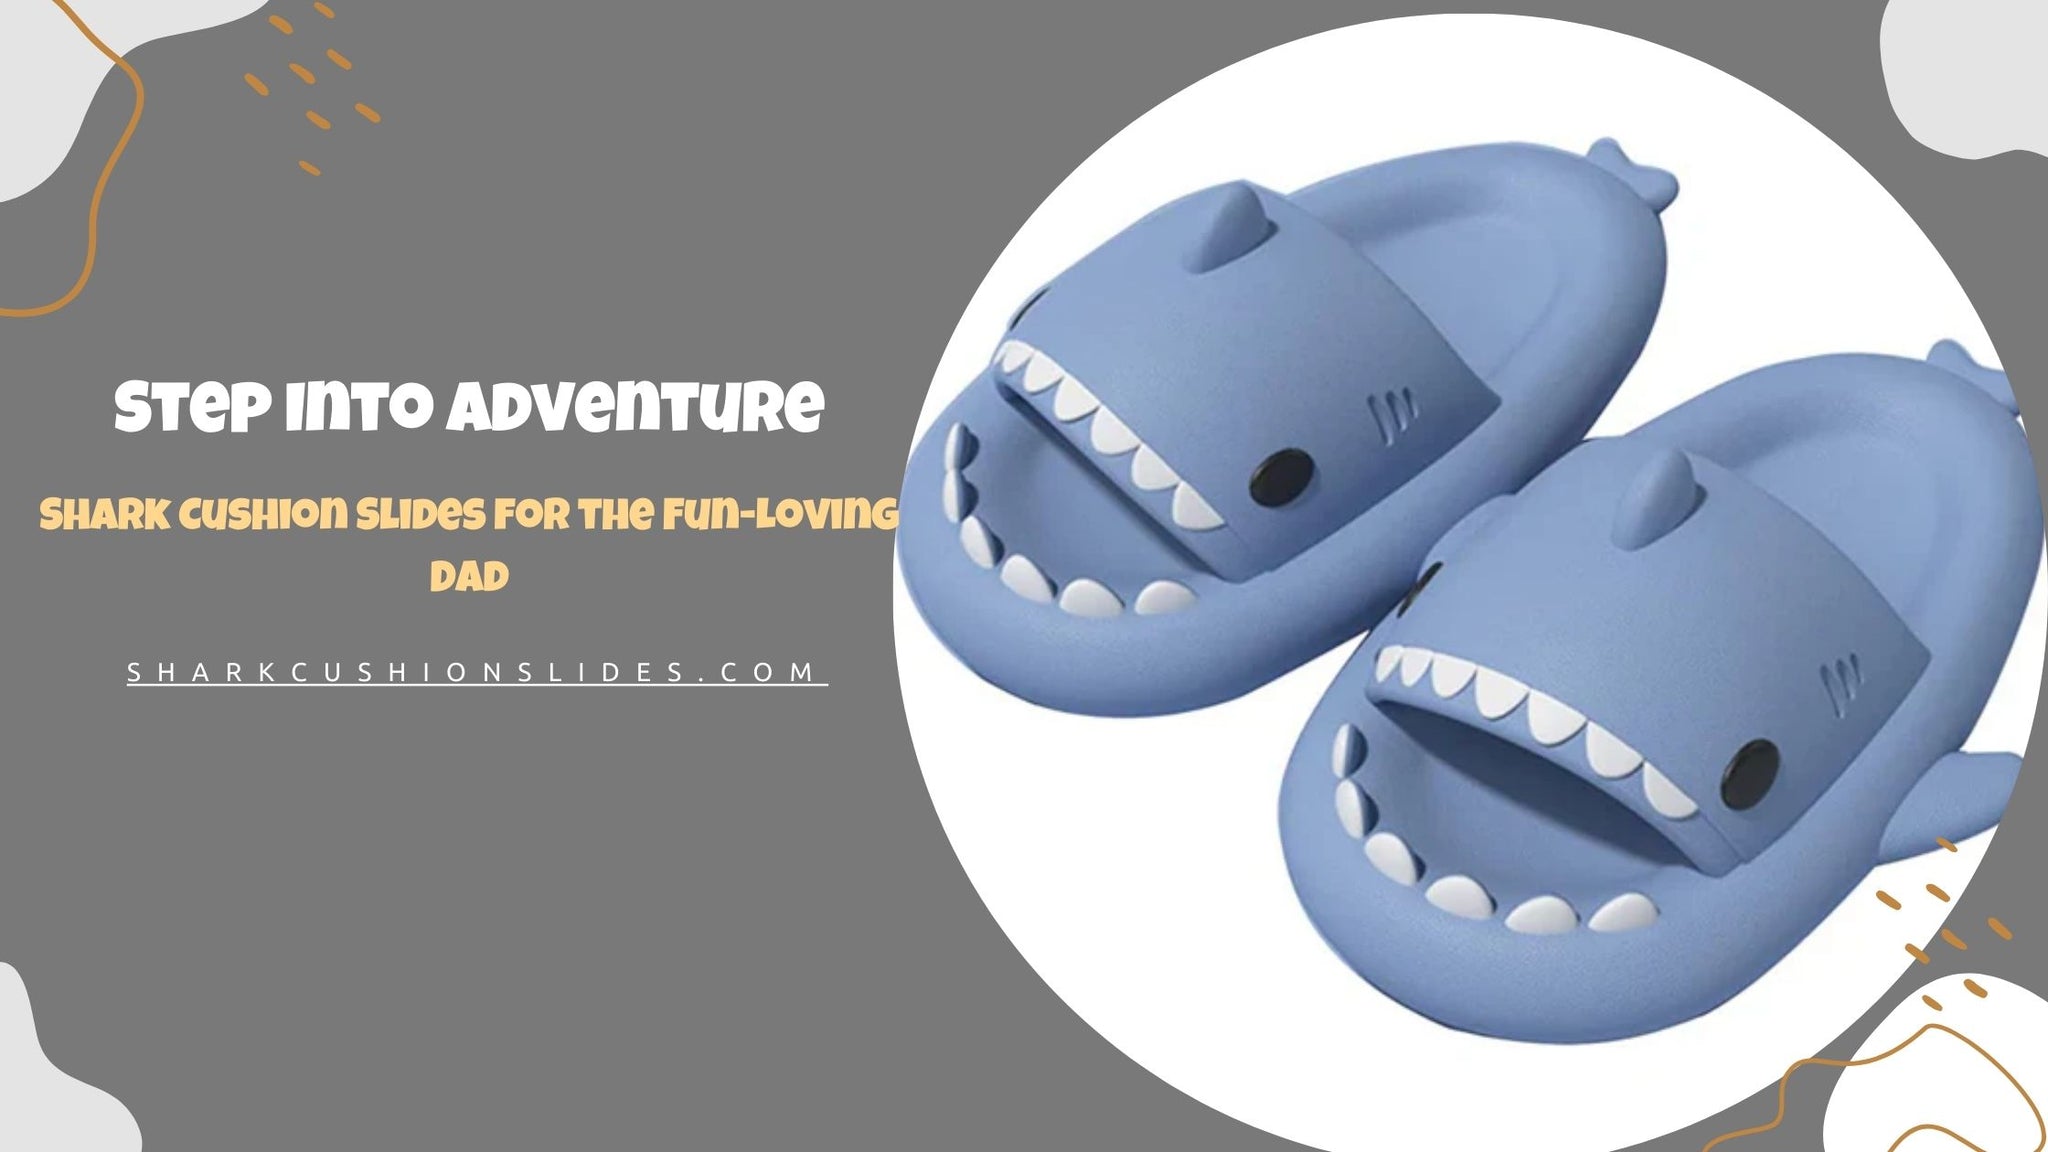 Step Into Adventure: Shark Cushion Slides for the Fun-Loving Dad